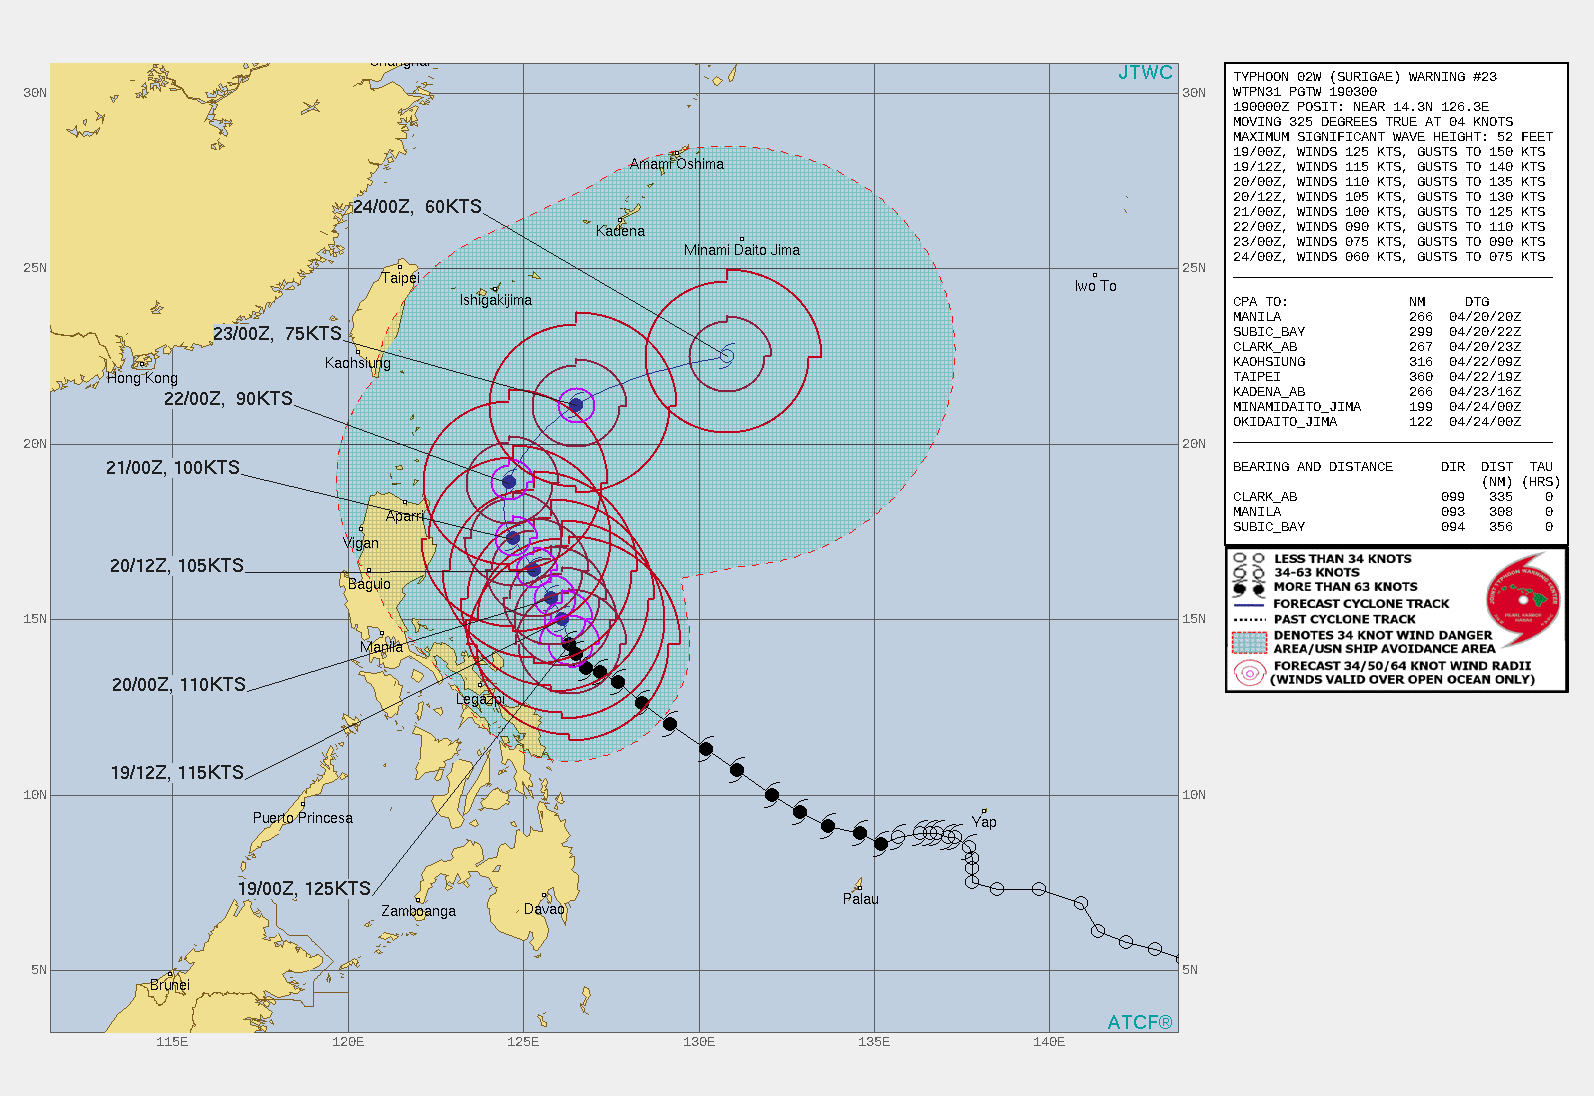 02W(SURIGAE). WARNING 23 ISSUED AT 19/03UTC.ANALYSIS INDICATES A SLIGHTLY MORE FAVORABLE ENVIRONMENT WITH THE LOW (5-10KTS) VERTICAL  WIND SHEAR (VWS) AND WARM (29-30C) SEA SURFACE TEMPERATURES (SSTS)  IN THE PHILIPPINE SEA. THE IMPROVED RADIAL OUTFLOW IS NOW ENHANCING  SLIGHT DEVELOPMENT AFTER A MIDLATITUDE TROUGH MIGRATED TO THE  NORTHEAST AS SURIGAE TRACKS SLOWLY ALONG THE WESTERN PERIPHERY OF  THE SUBTROPICAL RIDGE (STR) TO THE EAST. TY 02W IS CONTINUING TO TRACK NORTH-NORTHWEST IN A WEAK  STEERING ENVIRONMENT AS THE STR ELONGATES MERIDIONALLY THROUGH   36/48H.HIGHER VWS, SLIGHTLY COOLER SSTS, AND DIMINISHING OUTFLOW ALOFT  WILL BE THE PRIMARY CAUSE TO GRADUAL WEAKENING, DOWN TO 90KNOTS/CAT2 BY 72H. AFTER 72H, TY SURIGAE WILL CREST THE AXIS OF THE STR AND  ACCELERATE NORTHEASTWARD. ONCE SURIGAE MOVES TOWARD THE HIGHER  LATITUDES, IT WILL UNDERGO EXTRATROPICAL TRANSITION AS VWS INCREASES  TO +30KNOTS, SSTS DECREASE TO 24-25C, WHICH WILL ULTIMATELY LEAD TO A  DECREASE OF INTENSITY TO 75KNOTS/CAT1 BY 96H.